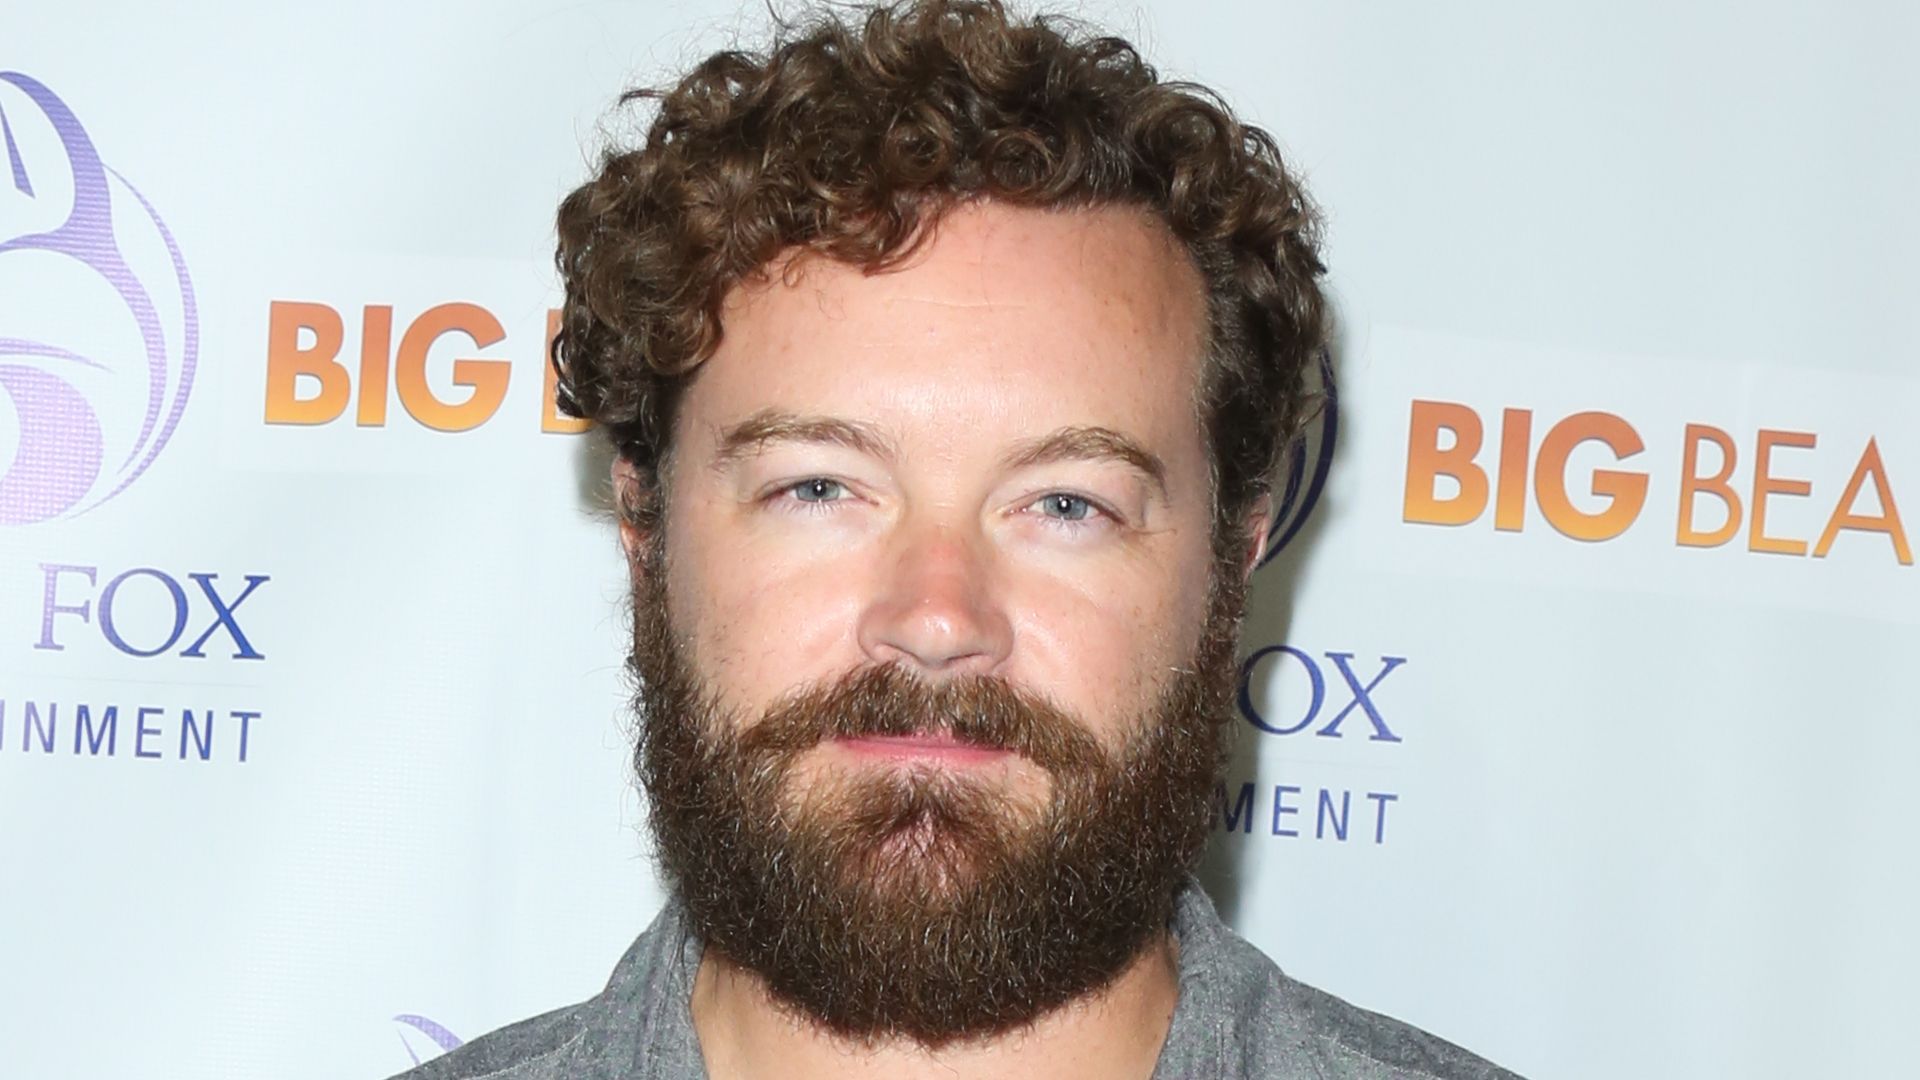 Actor Danny Masterson attends the premiere of "Big Bear" at The London Hotel on September 19, 2017 in West Hollywood, California